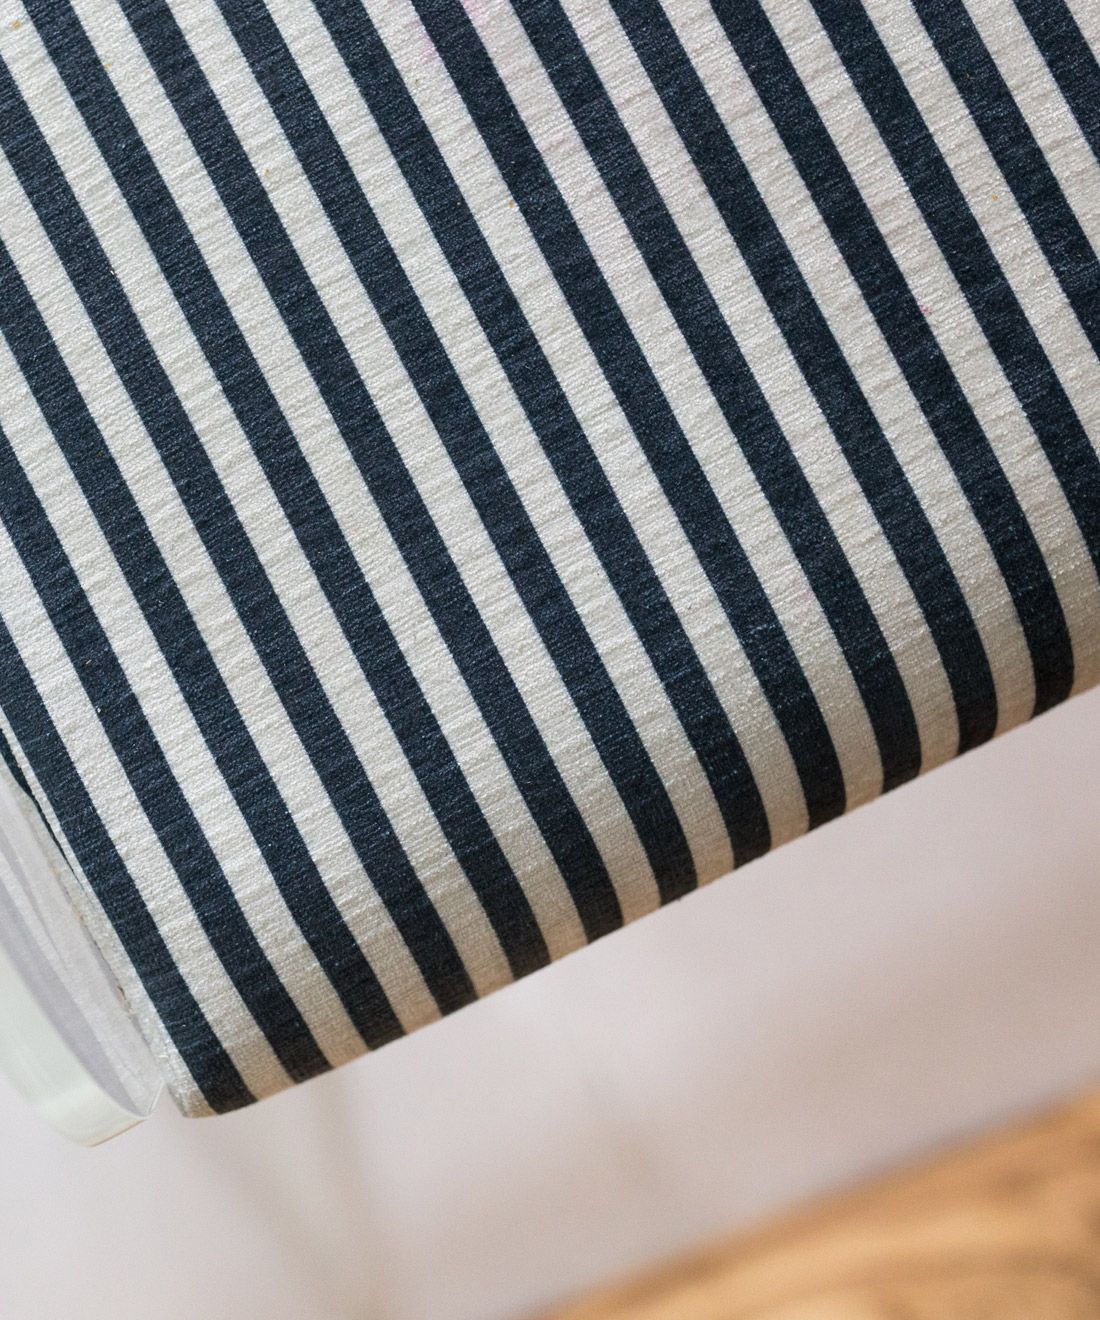 Candy Stripe Fabric • Black and White Striped Fabric • Bethany Linz • upholstered kitchen stools by Jewel Marlowe